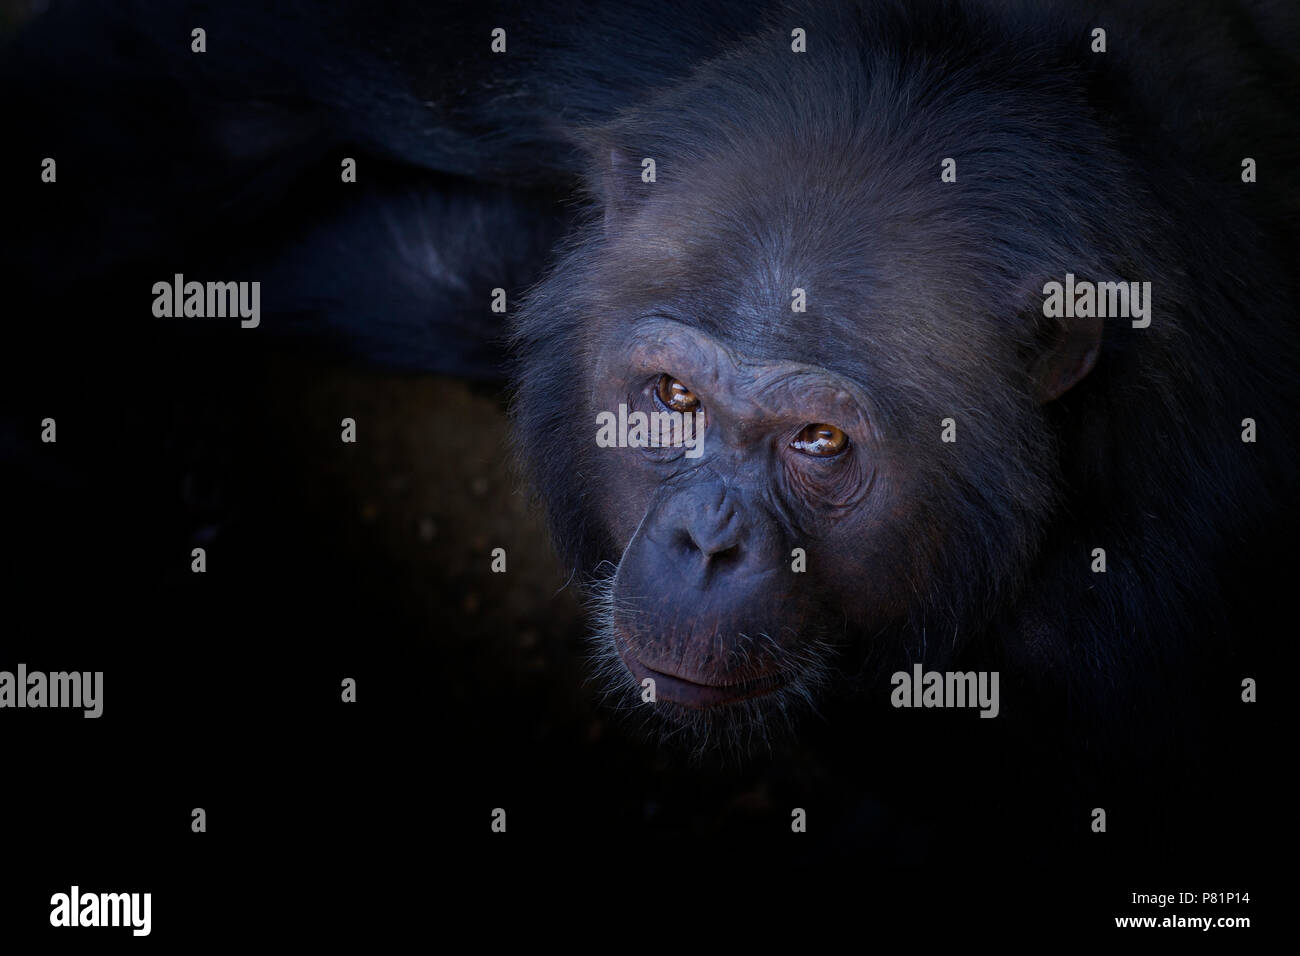 Wild chimpanzee close up portrait, face to face, intimidating and scary Stock Photo